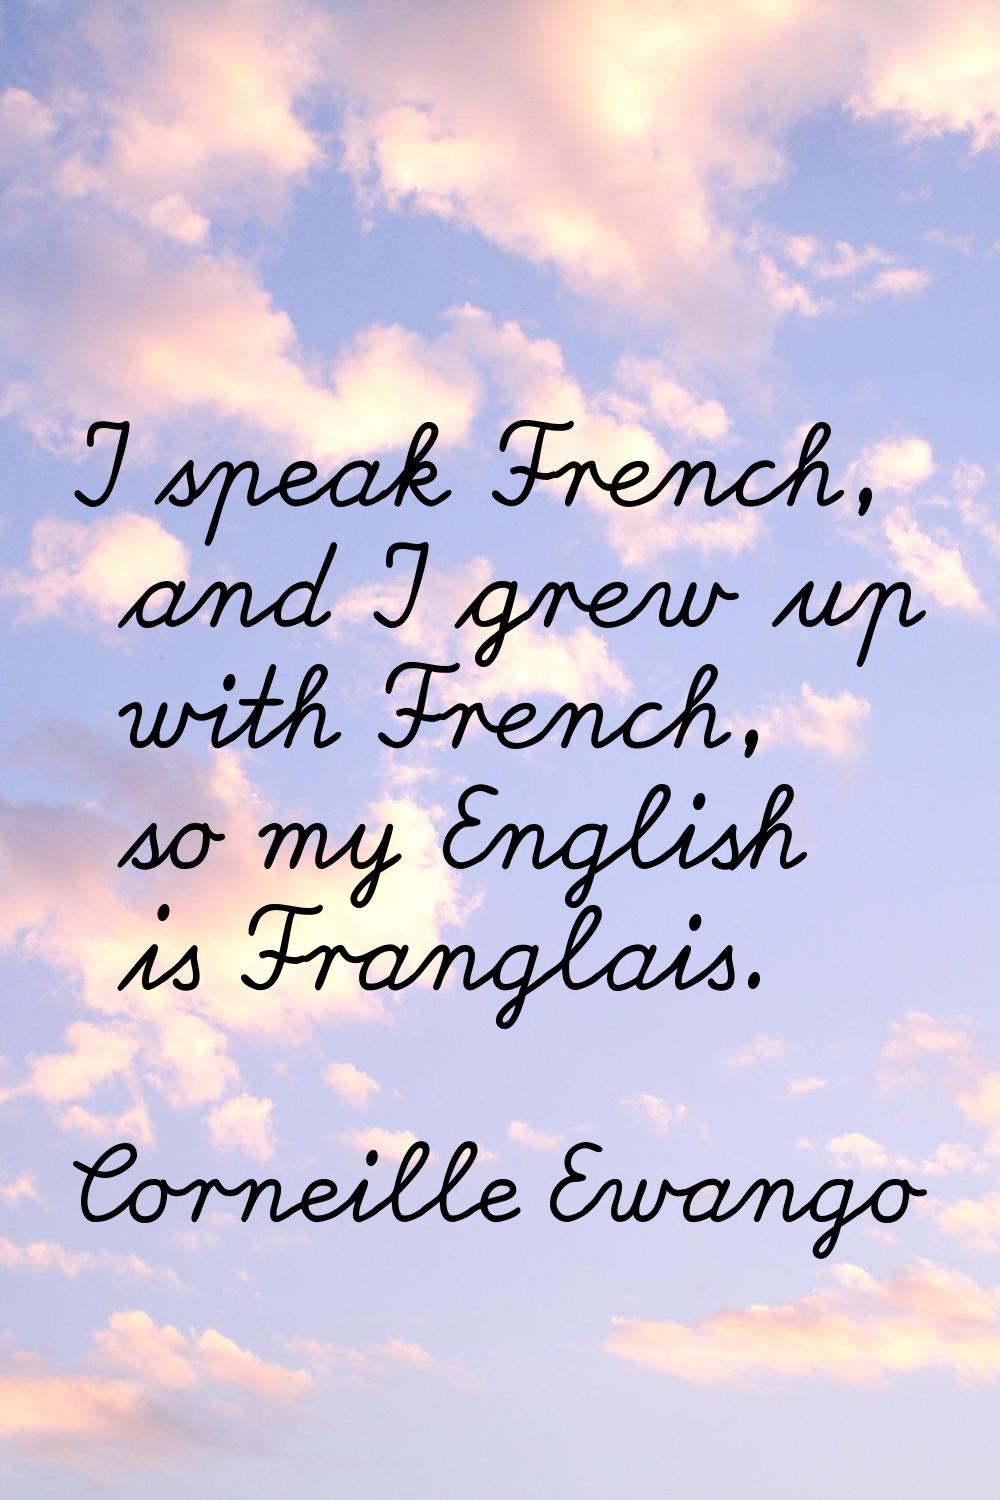 I speak French, and I grew up with French, so my English is Franglais.